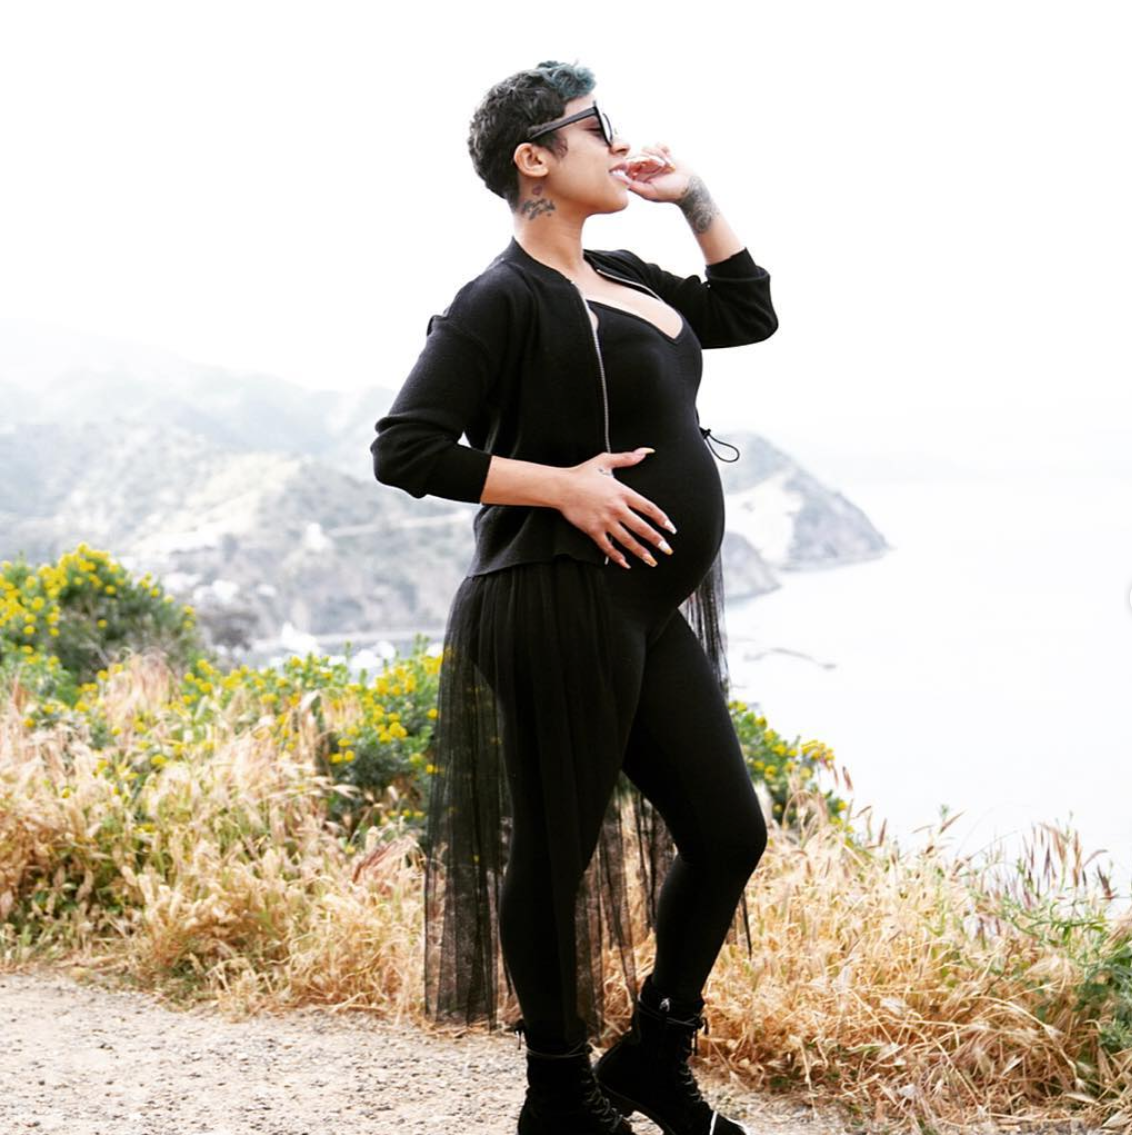 Bump Alert! These Celebrity Moms-To-Be Are Absolutely Glowing